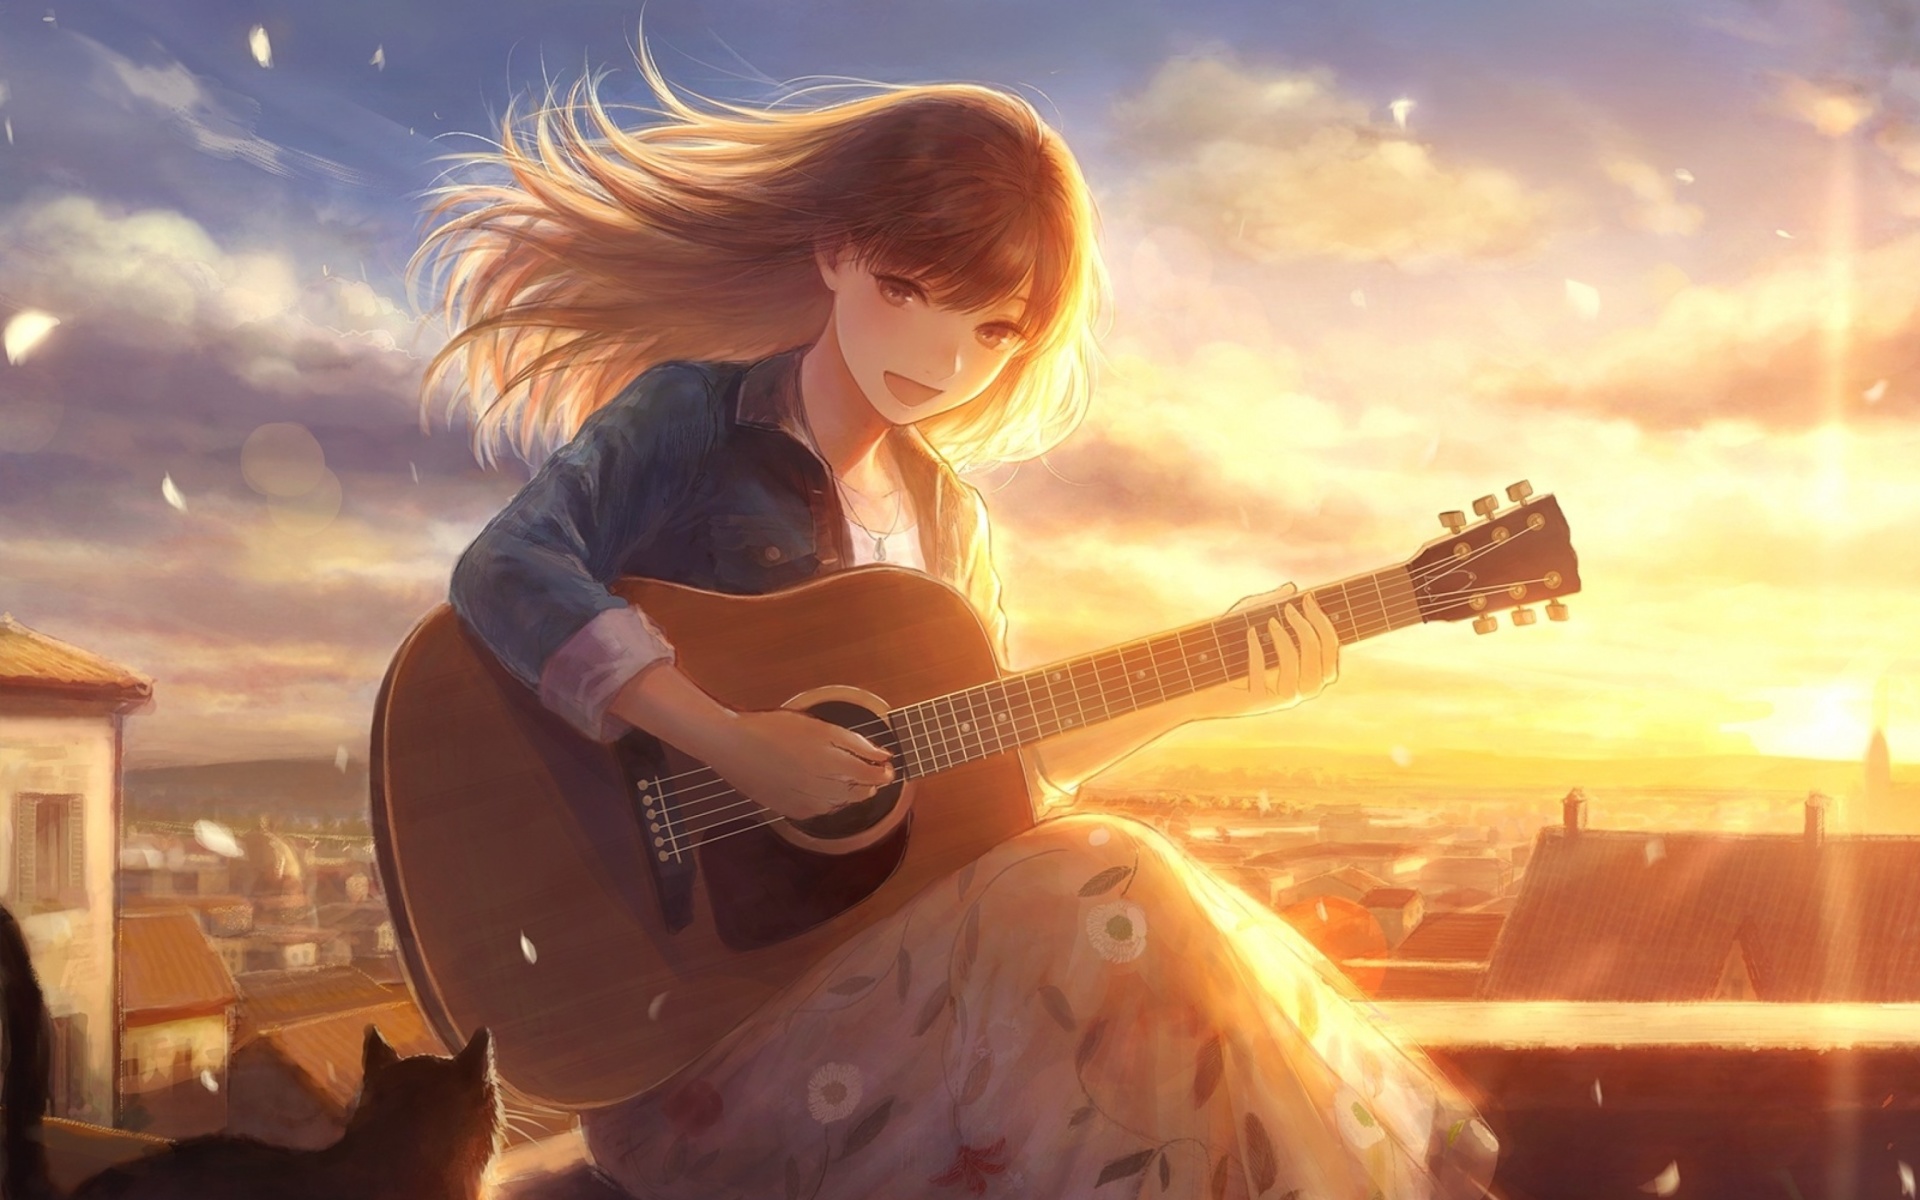 Anime Girl with Guitar wallpaper 1920x1200